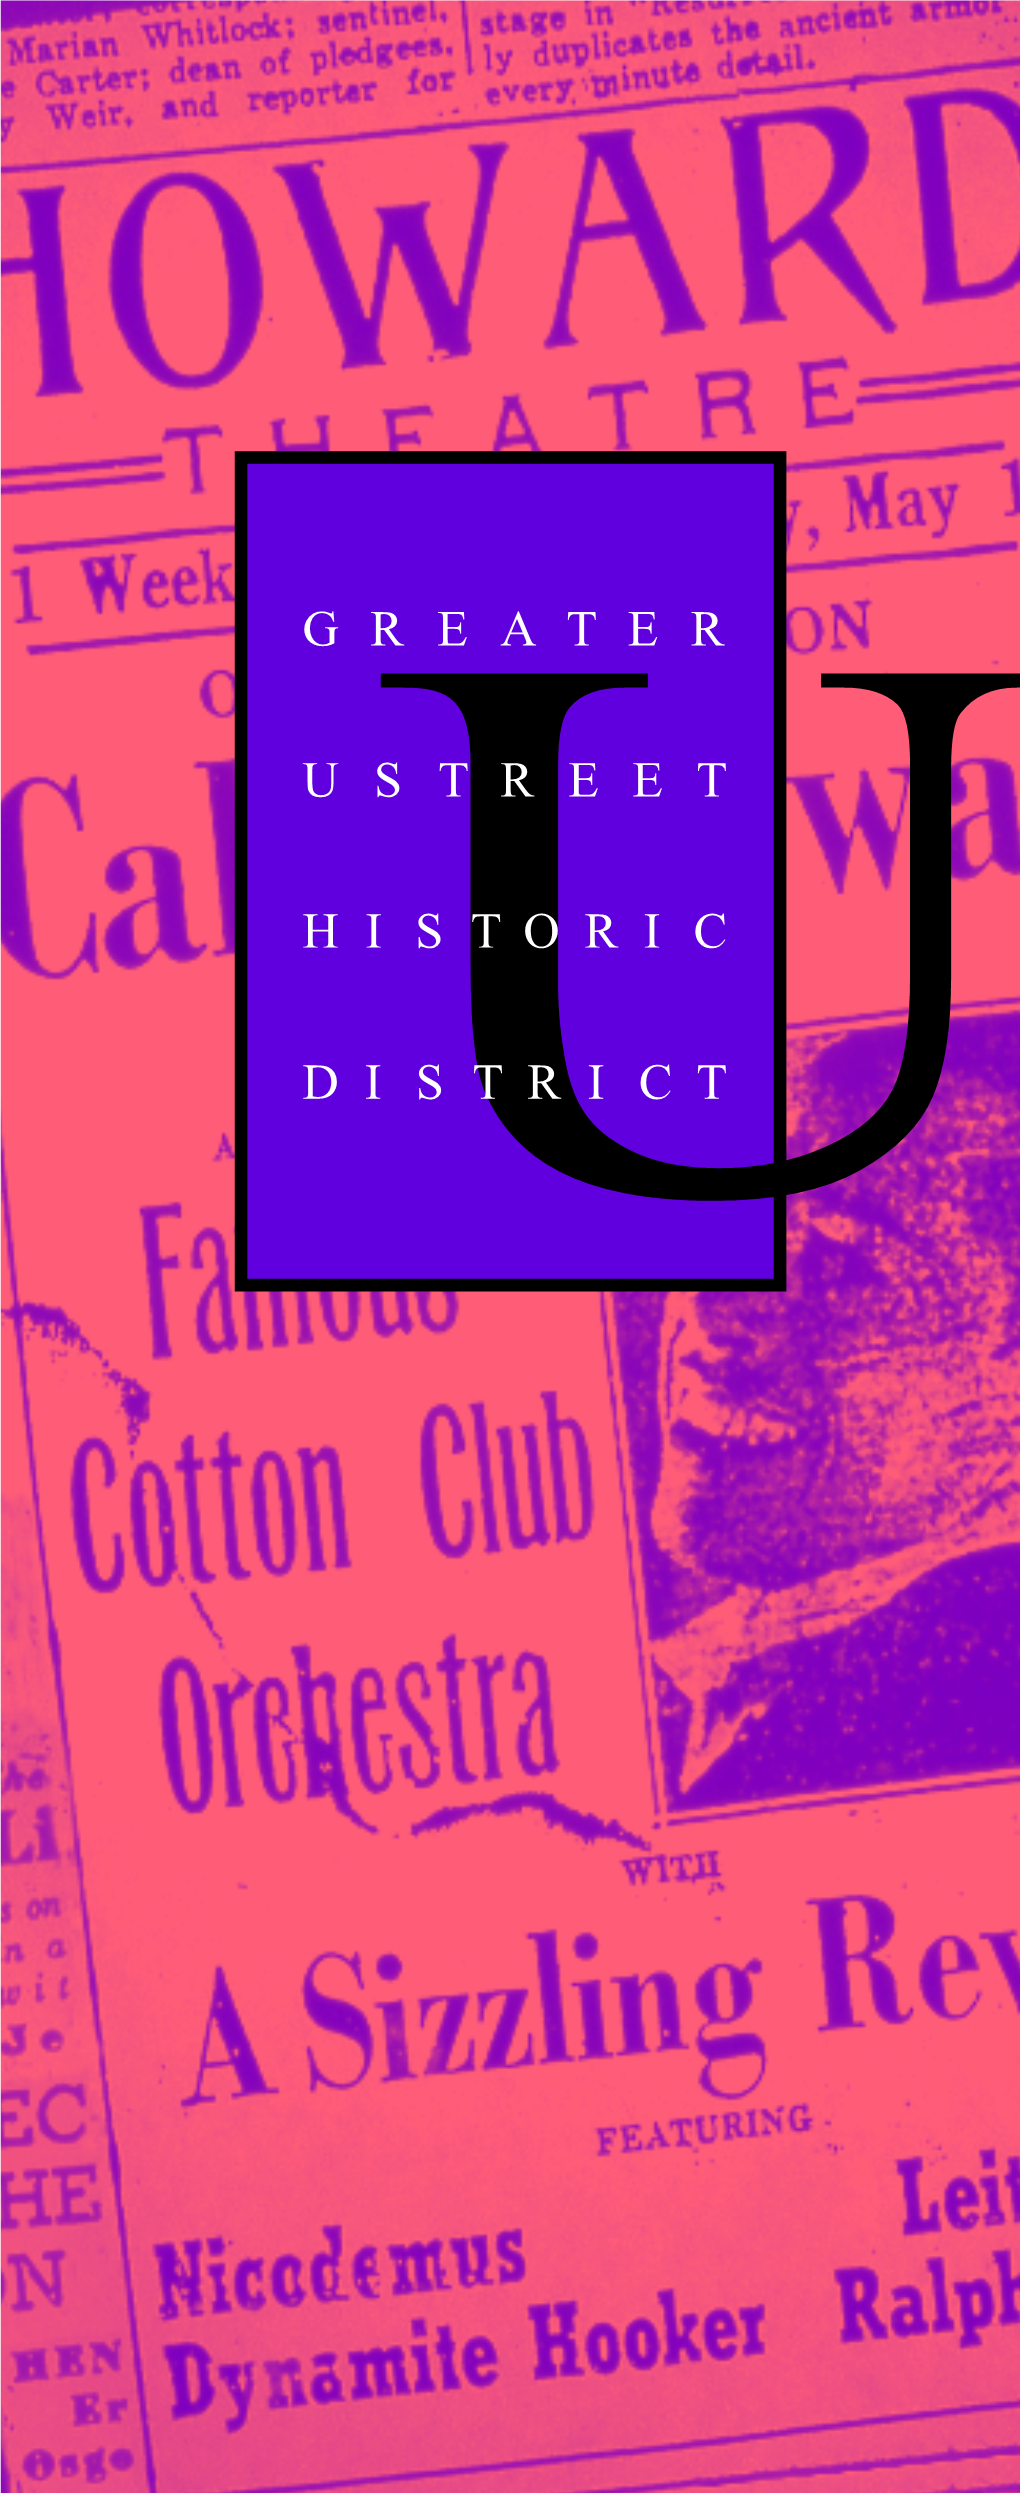 U Street Historic District Brochure Has Been Funded with the Assistance of a Matching Grant from the U.S